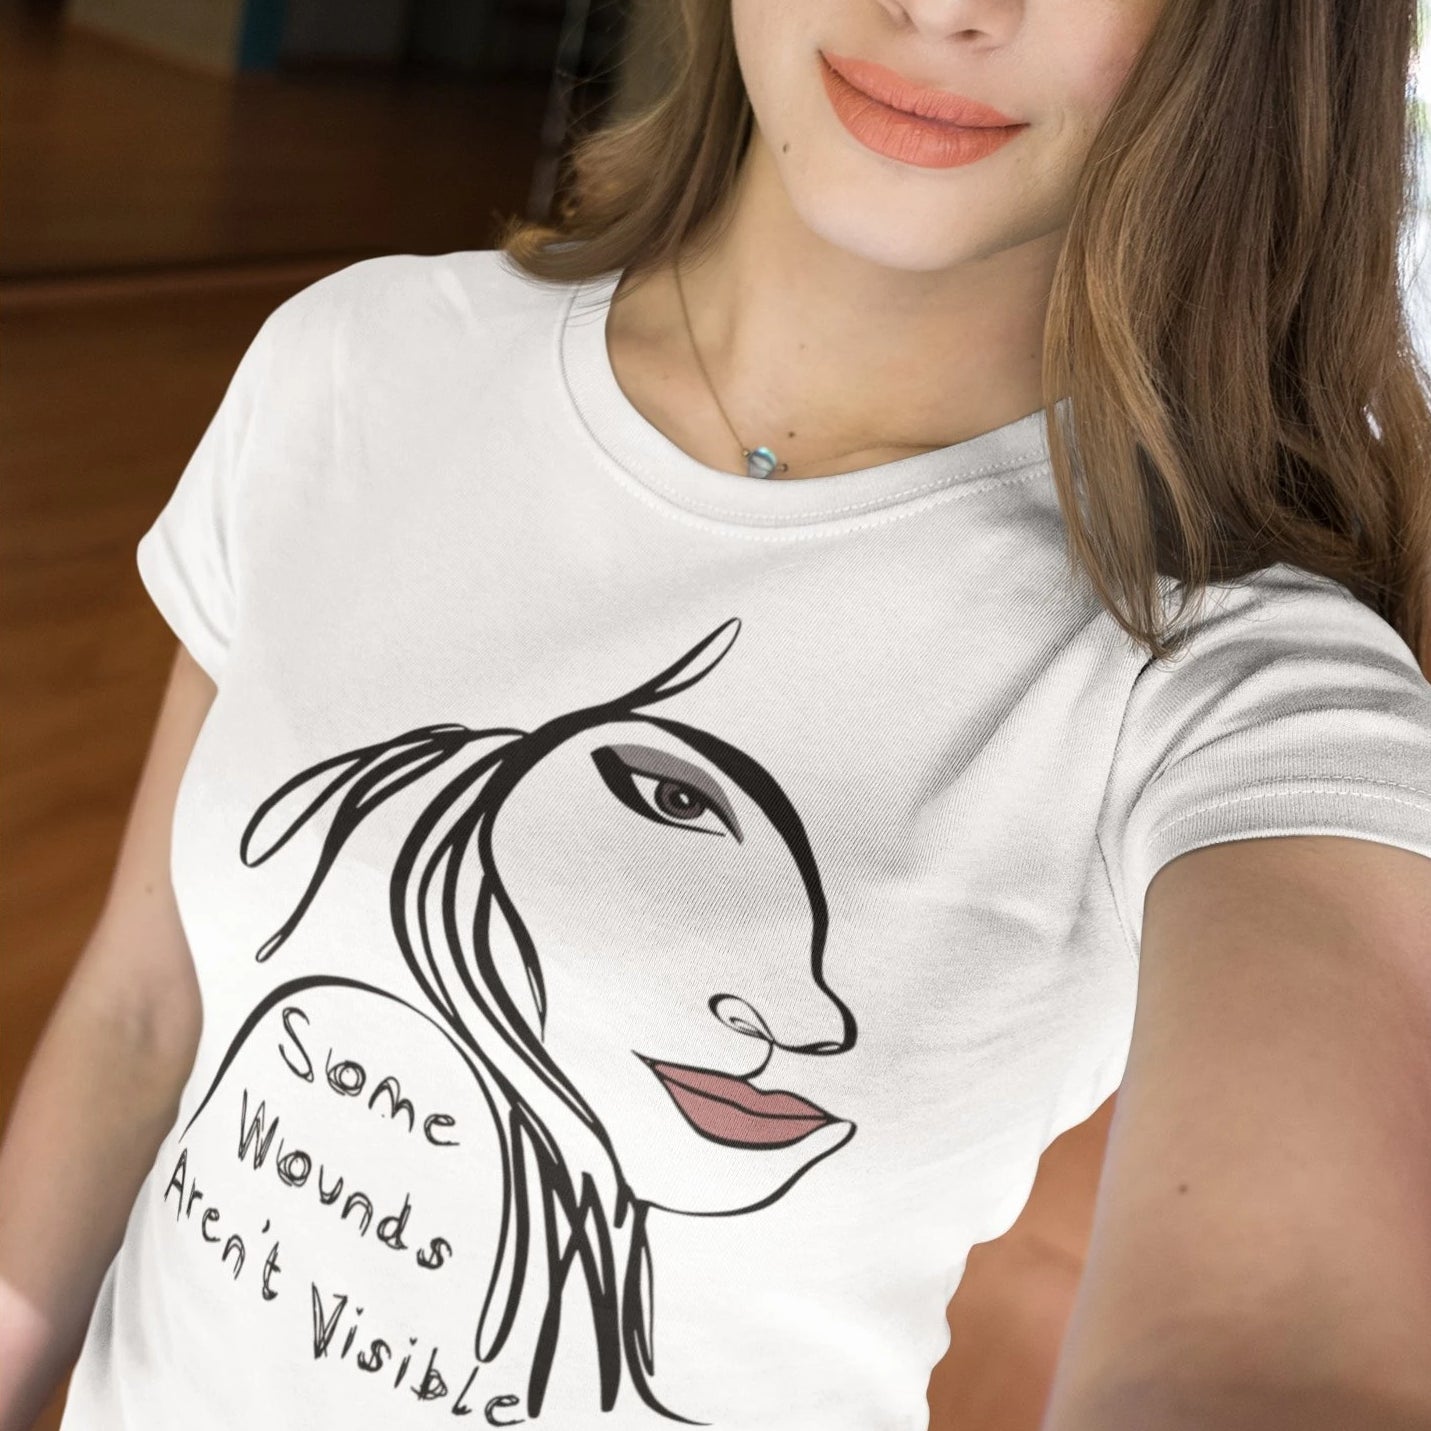 Some Wounds Aren't Visible: Invisible Battles Awareness T-shirt – Where Comfort Meets Empathy!